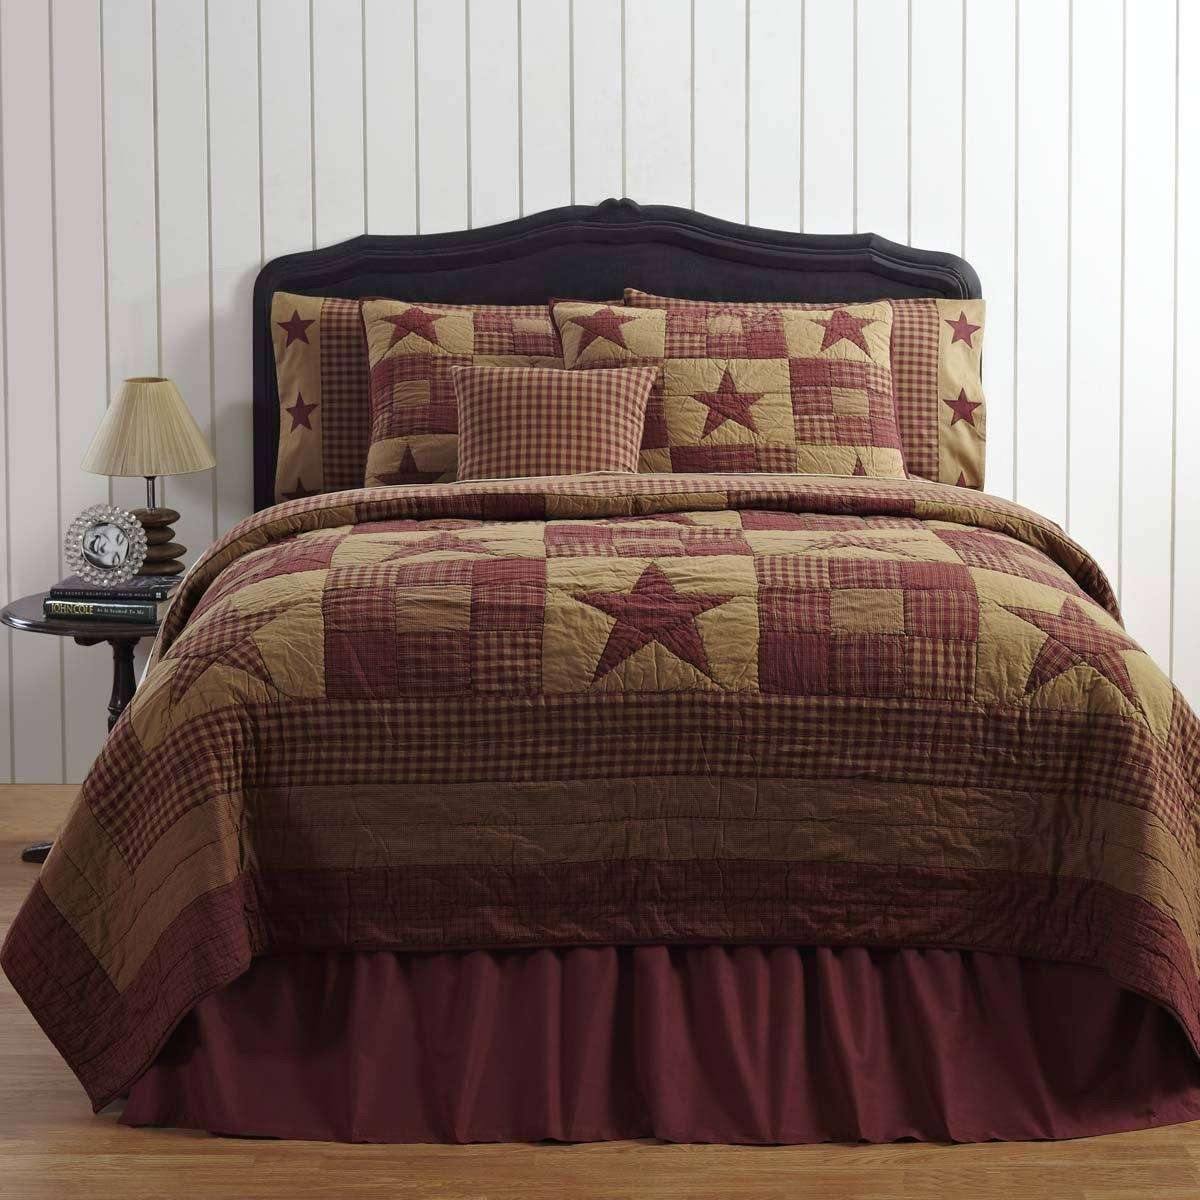 Ninepatch Star Twin Quilt 68Wx86L VHC Brands online